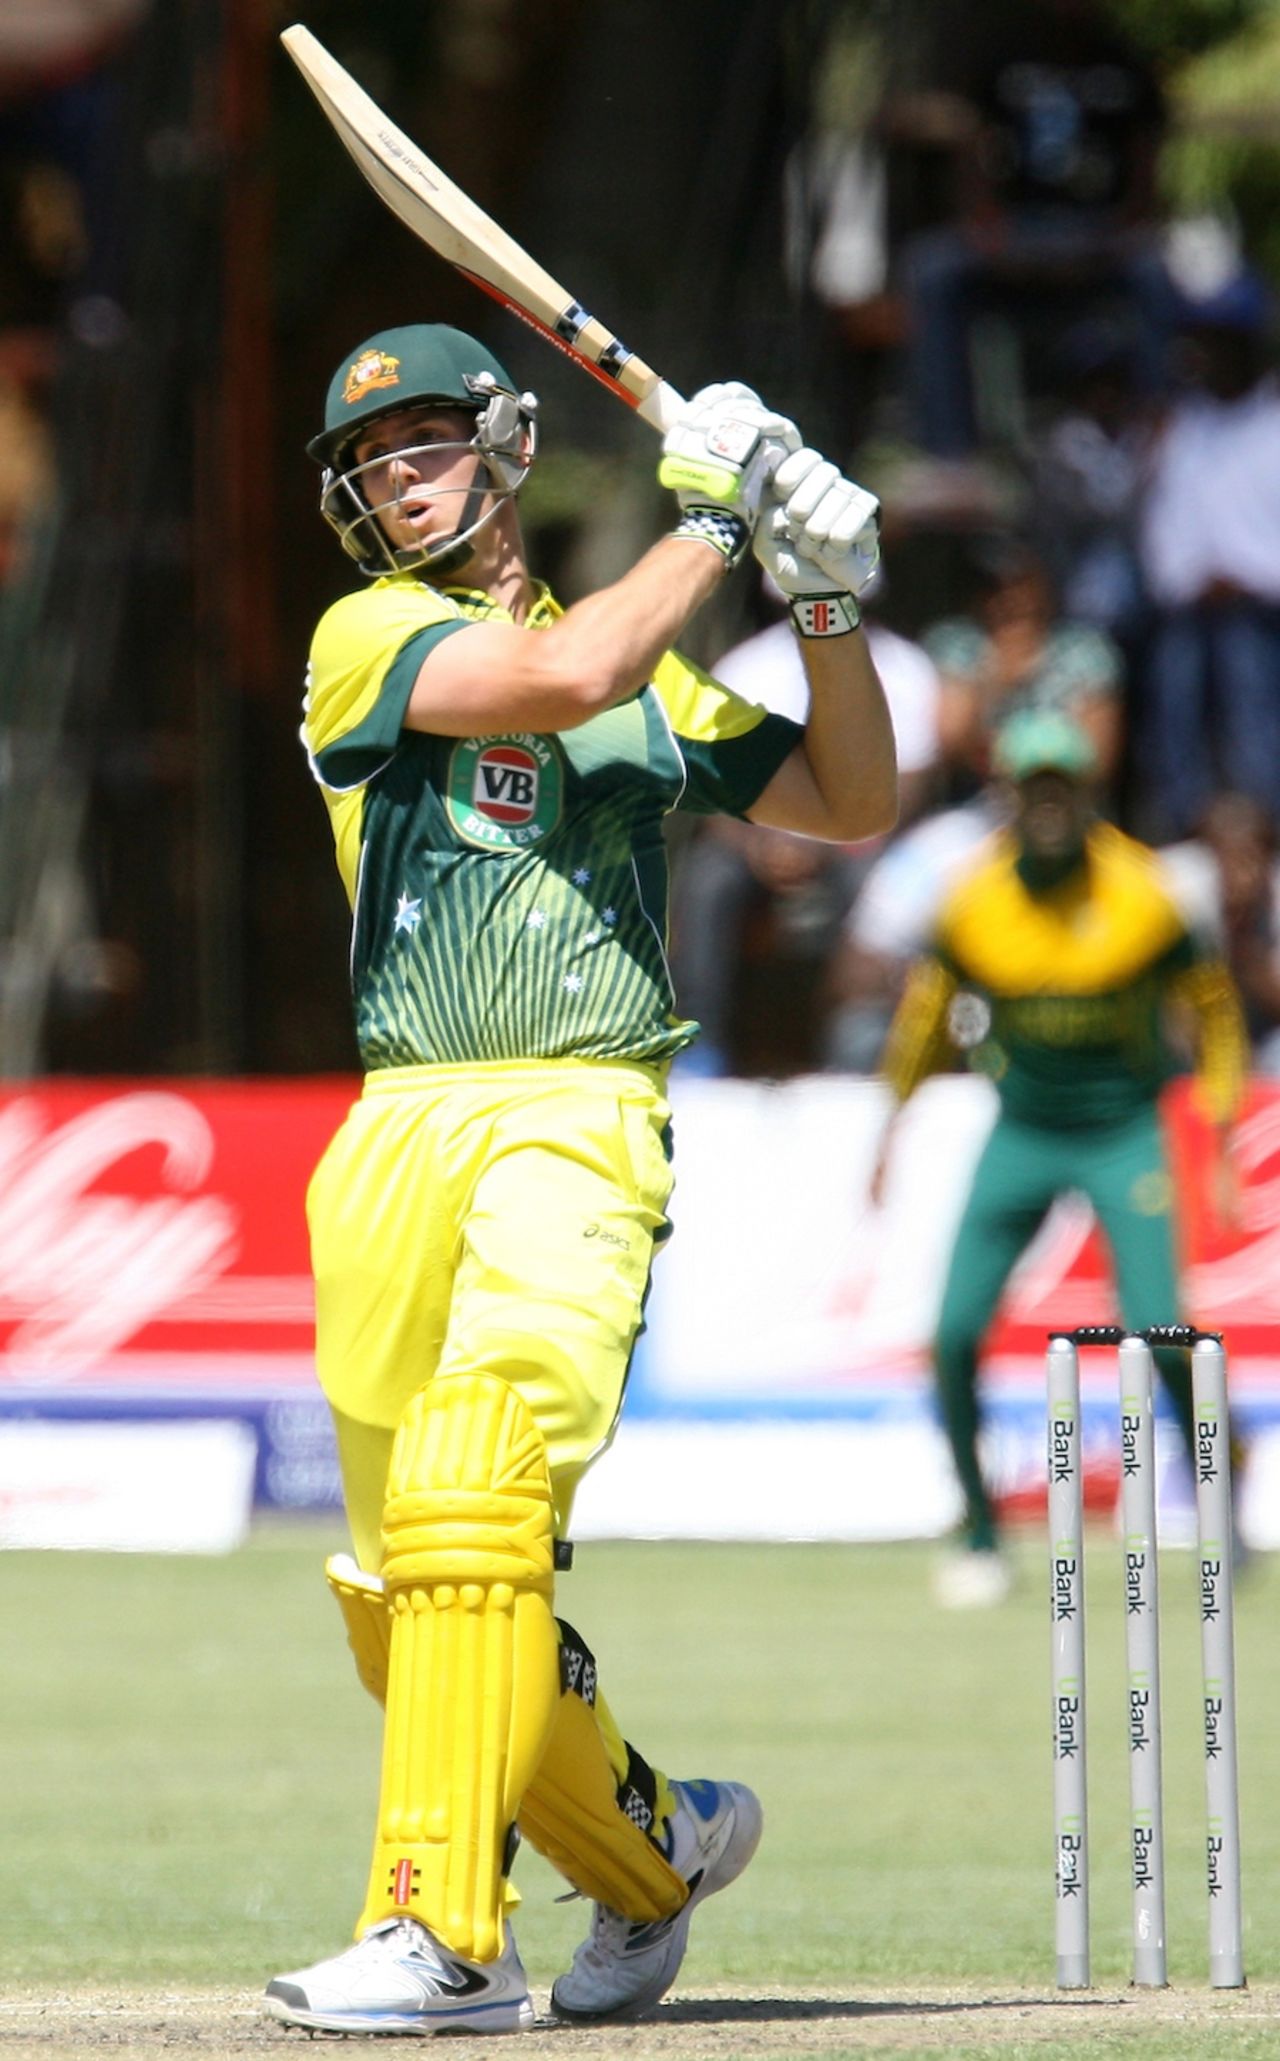 Mitchell Marsh hammered seven sixes, Australia v South Africa, tri-series, Harare, September 2, 2014